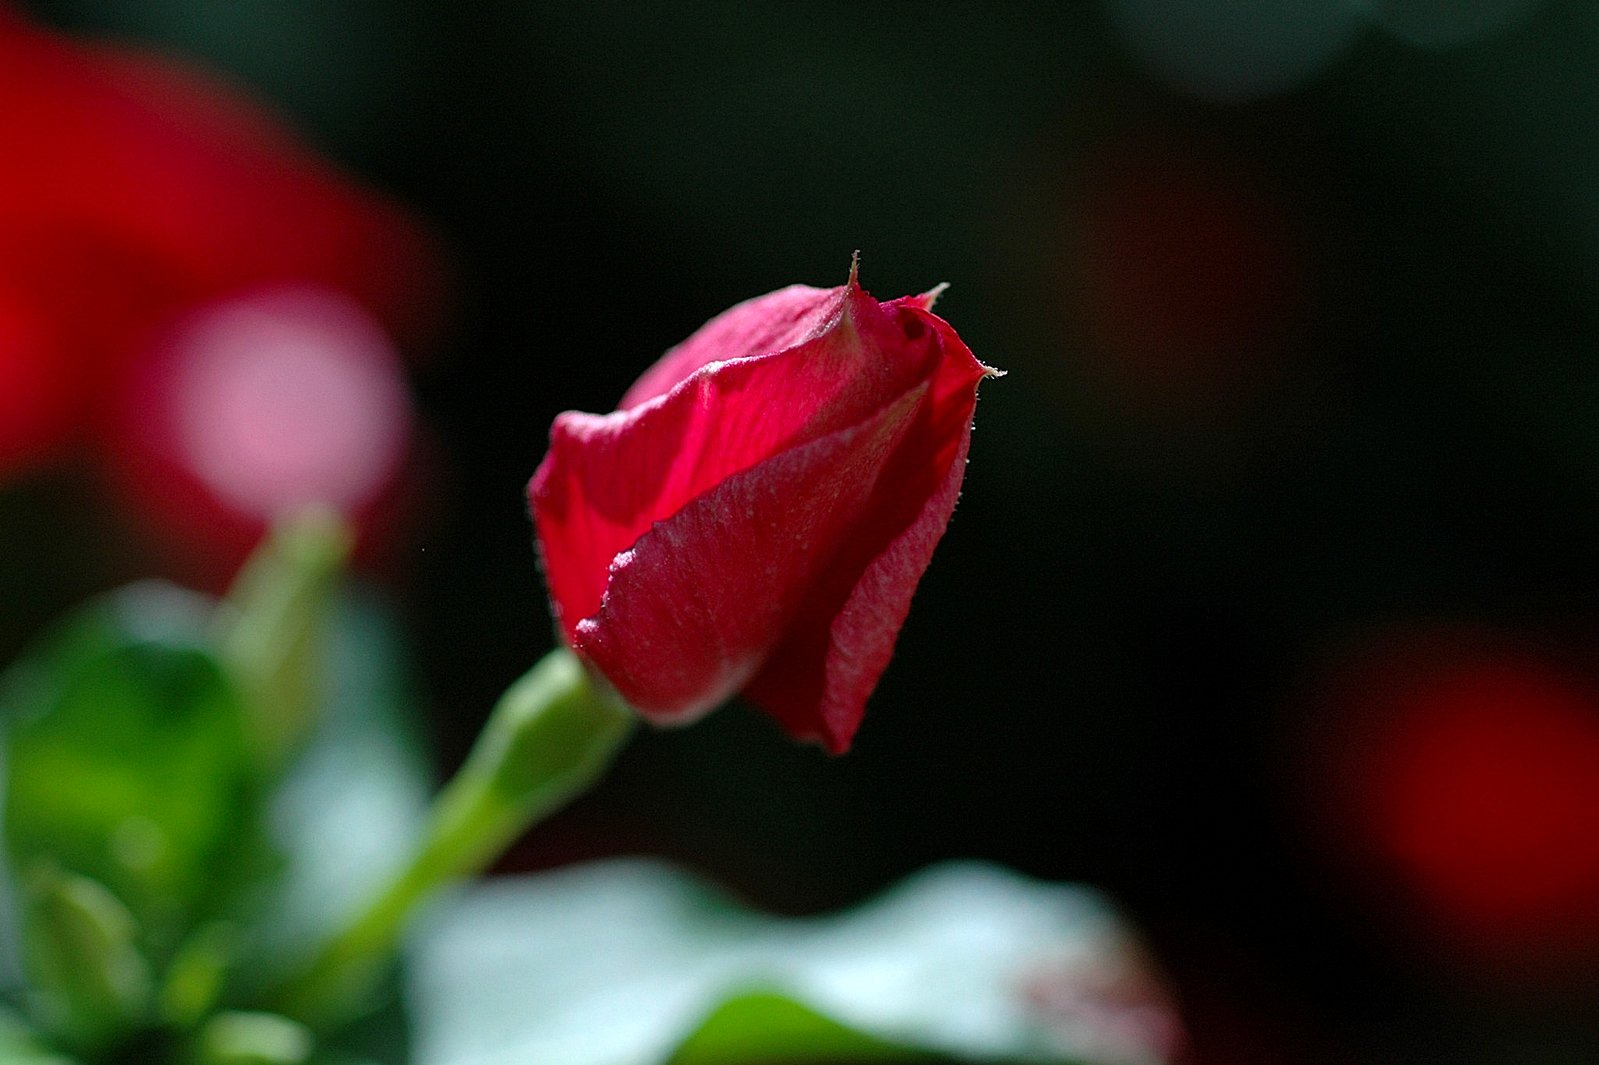 a single red rose with green stem sitting on the ground